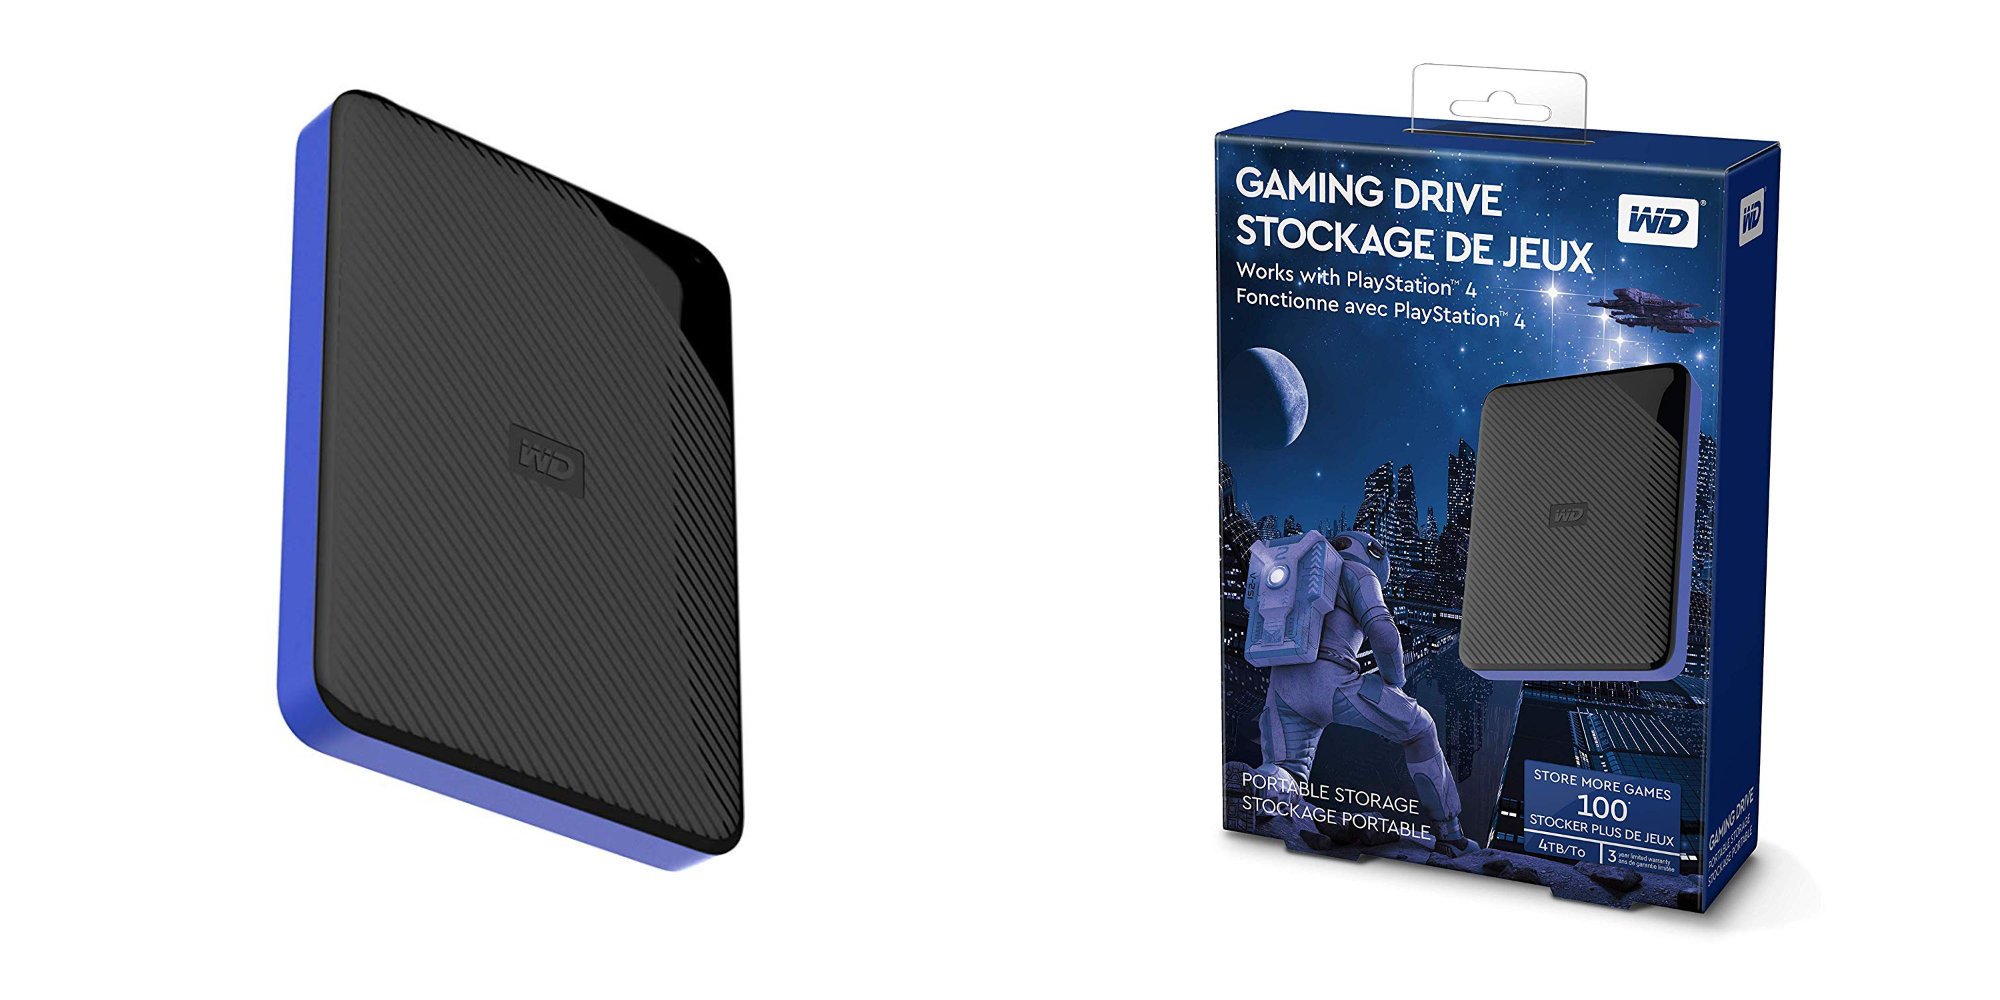 WD Gaming Drive 4tb. WD games. WD game backpicture. Как сайднит игровой WD 184.